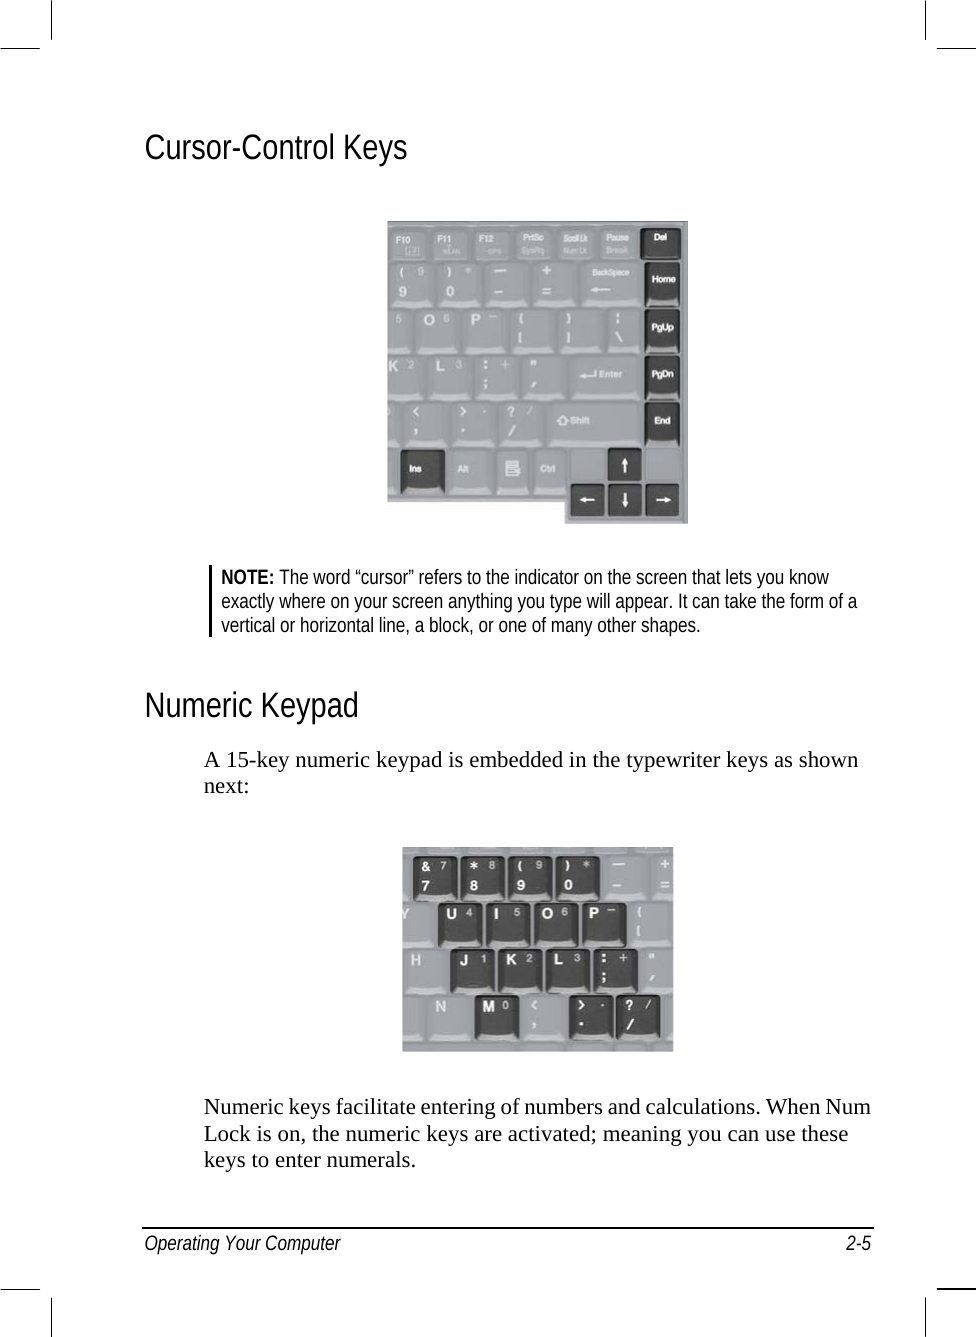  Cursor-Control Keys  NOTE: The word “cursor” refers to the indicator on the screen that lets you know exactly where on your screen anything you type will appear. It can take the form of a vertical or horizontal line, a block, or one of many other shapes.  Numeric Keypad A 15-key numeric keypad is embedded in the typewriter keys as shown next:  Numeric keys facilitate entering of numbers and calculations. When Num Lock is on, the numeric keys are activated; meaning you can use these keys to enter numerals. Operating Your Computer  2-5 